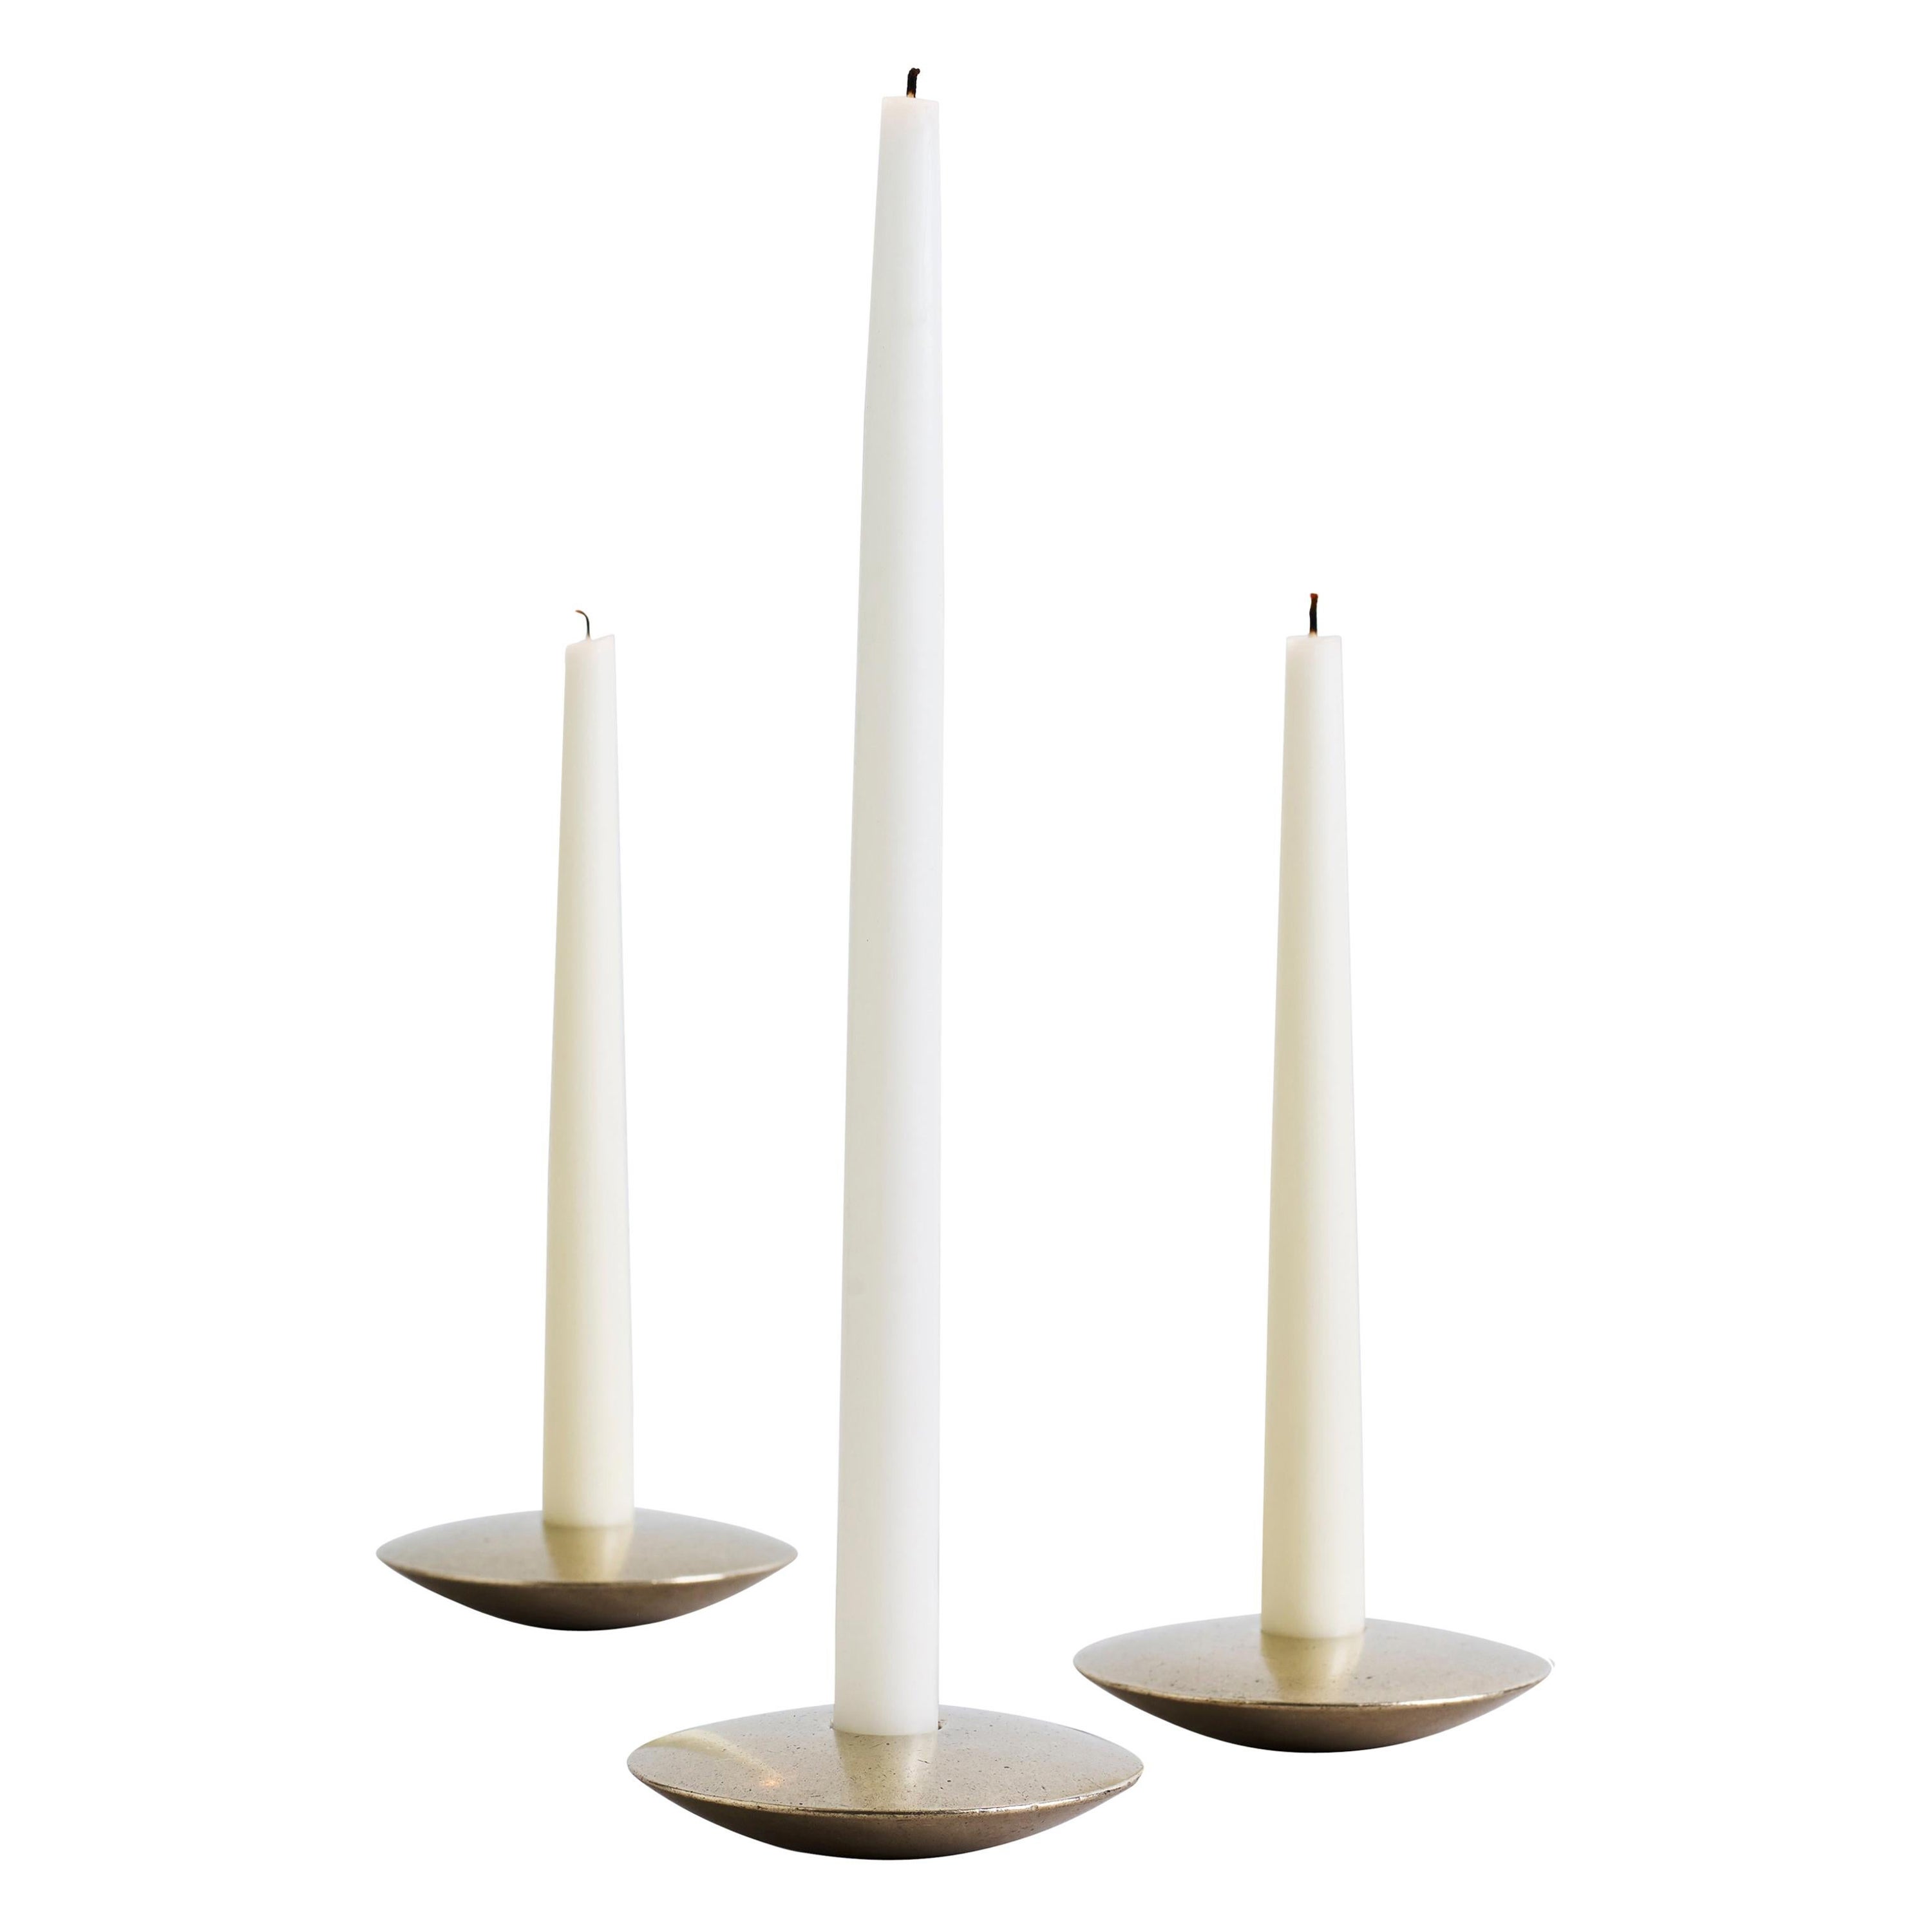 Ensemble of Three Contemporary Brass Candleholders, Henry Wilson